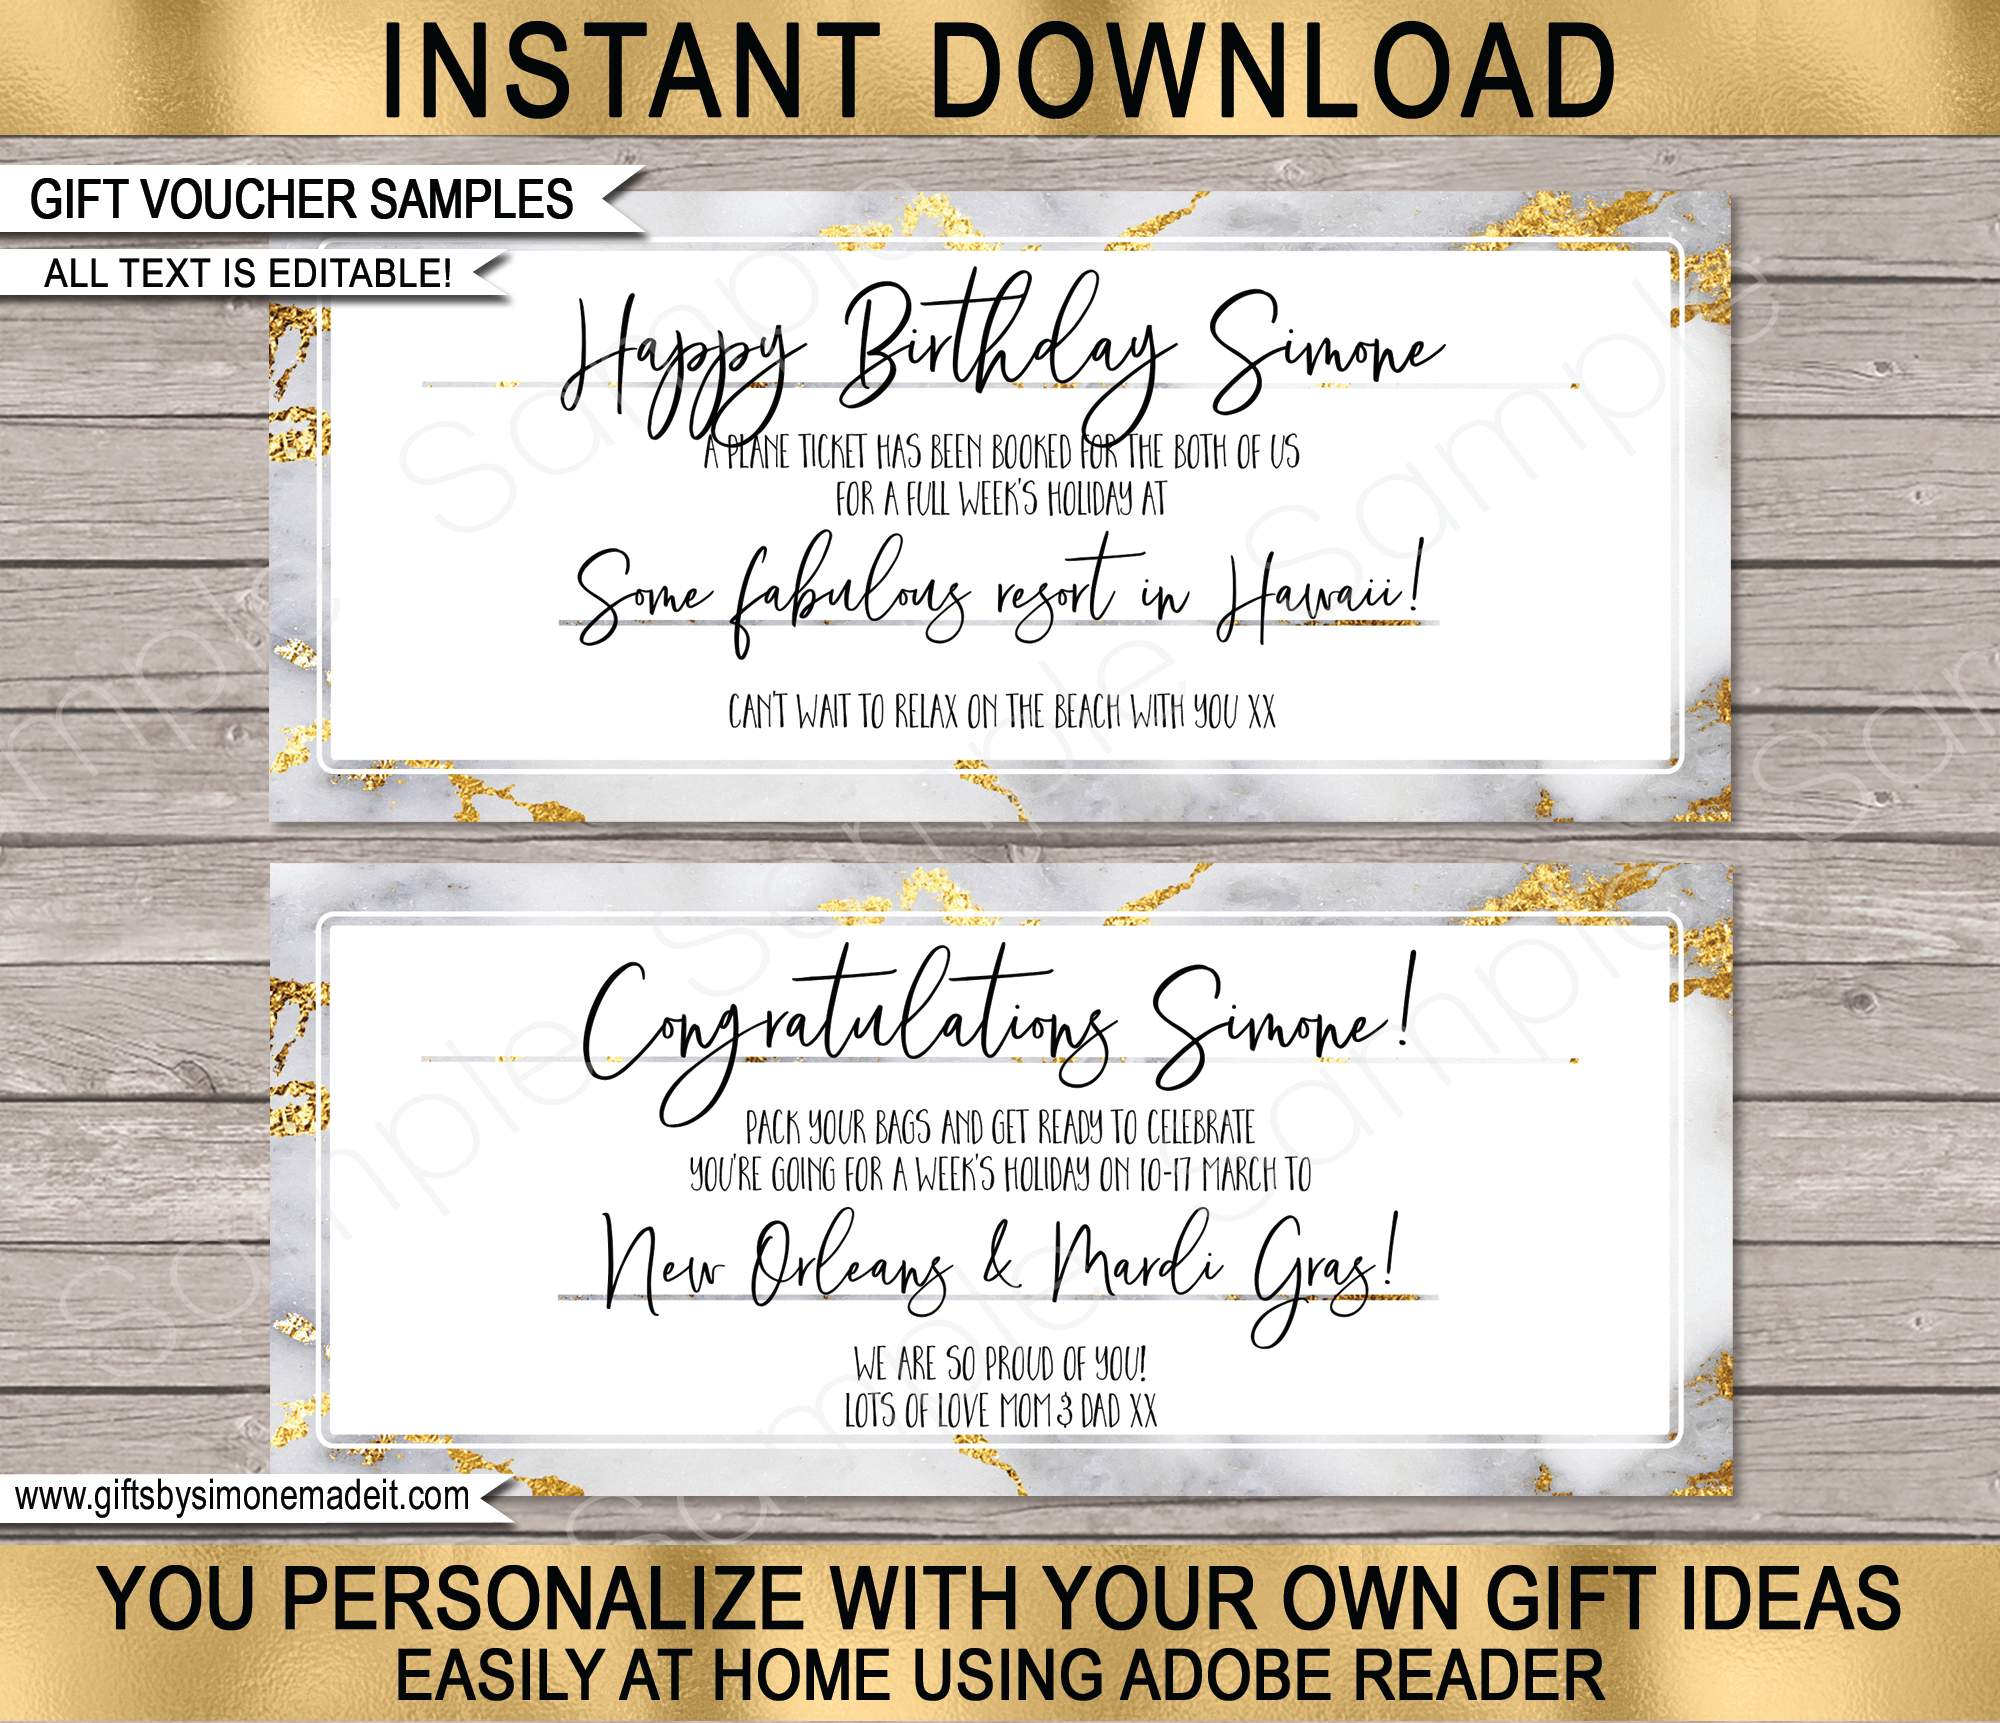 personalized gift certificate template